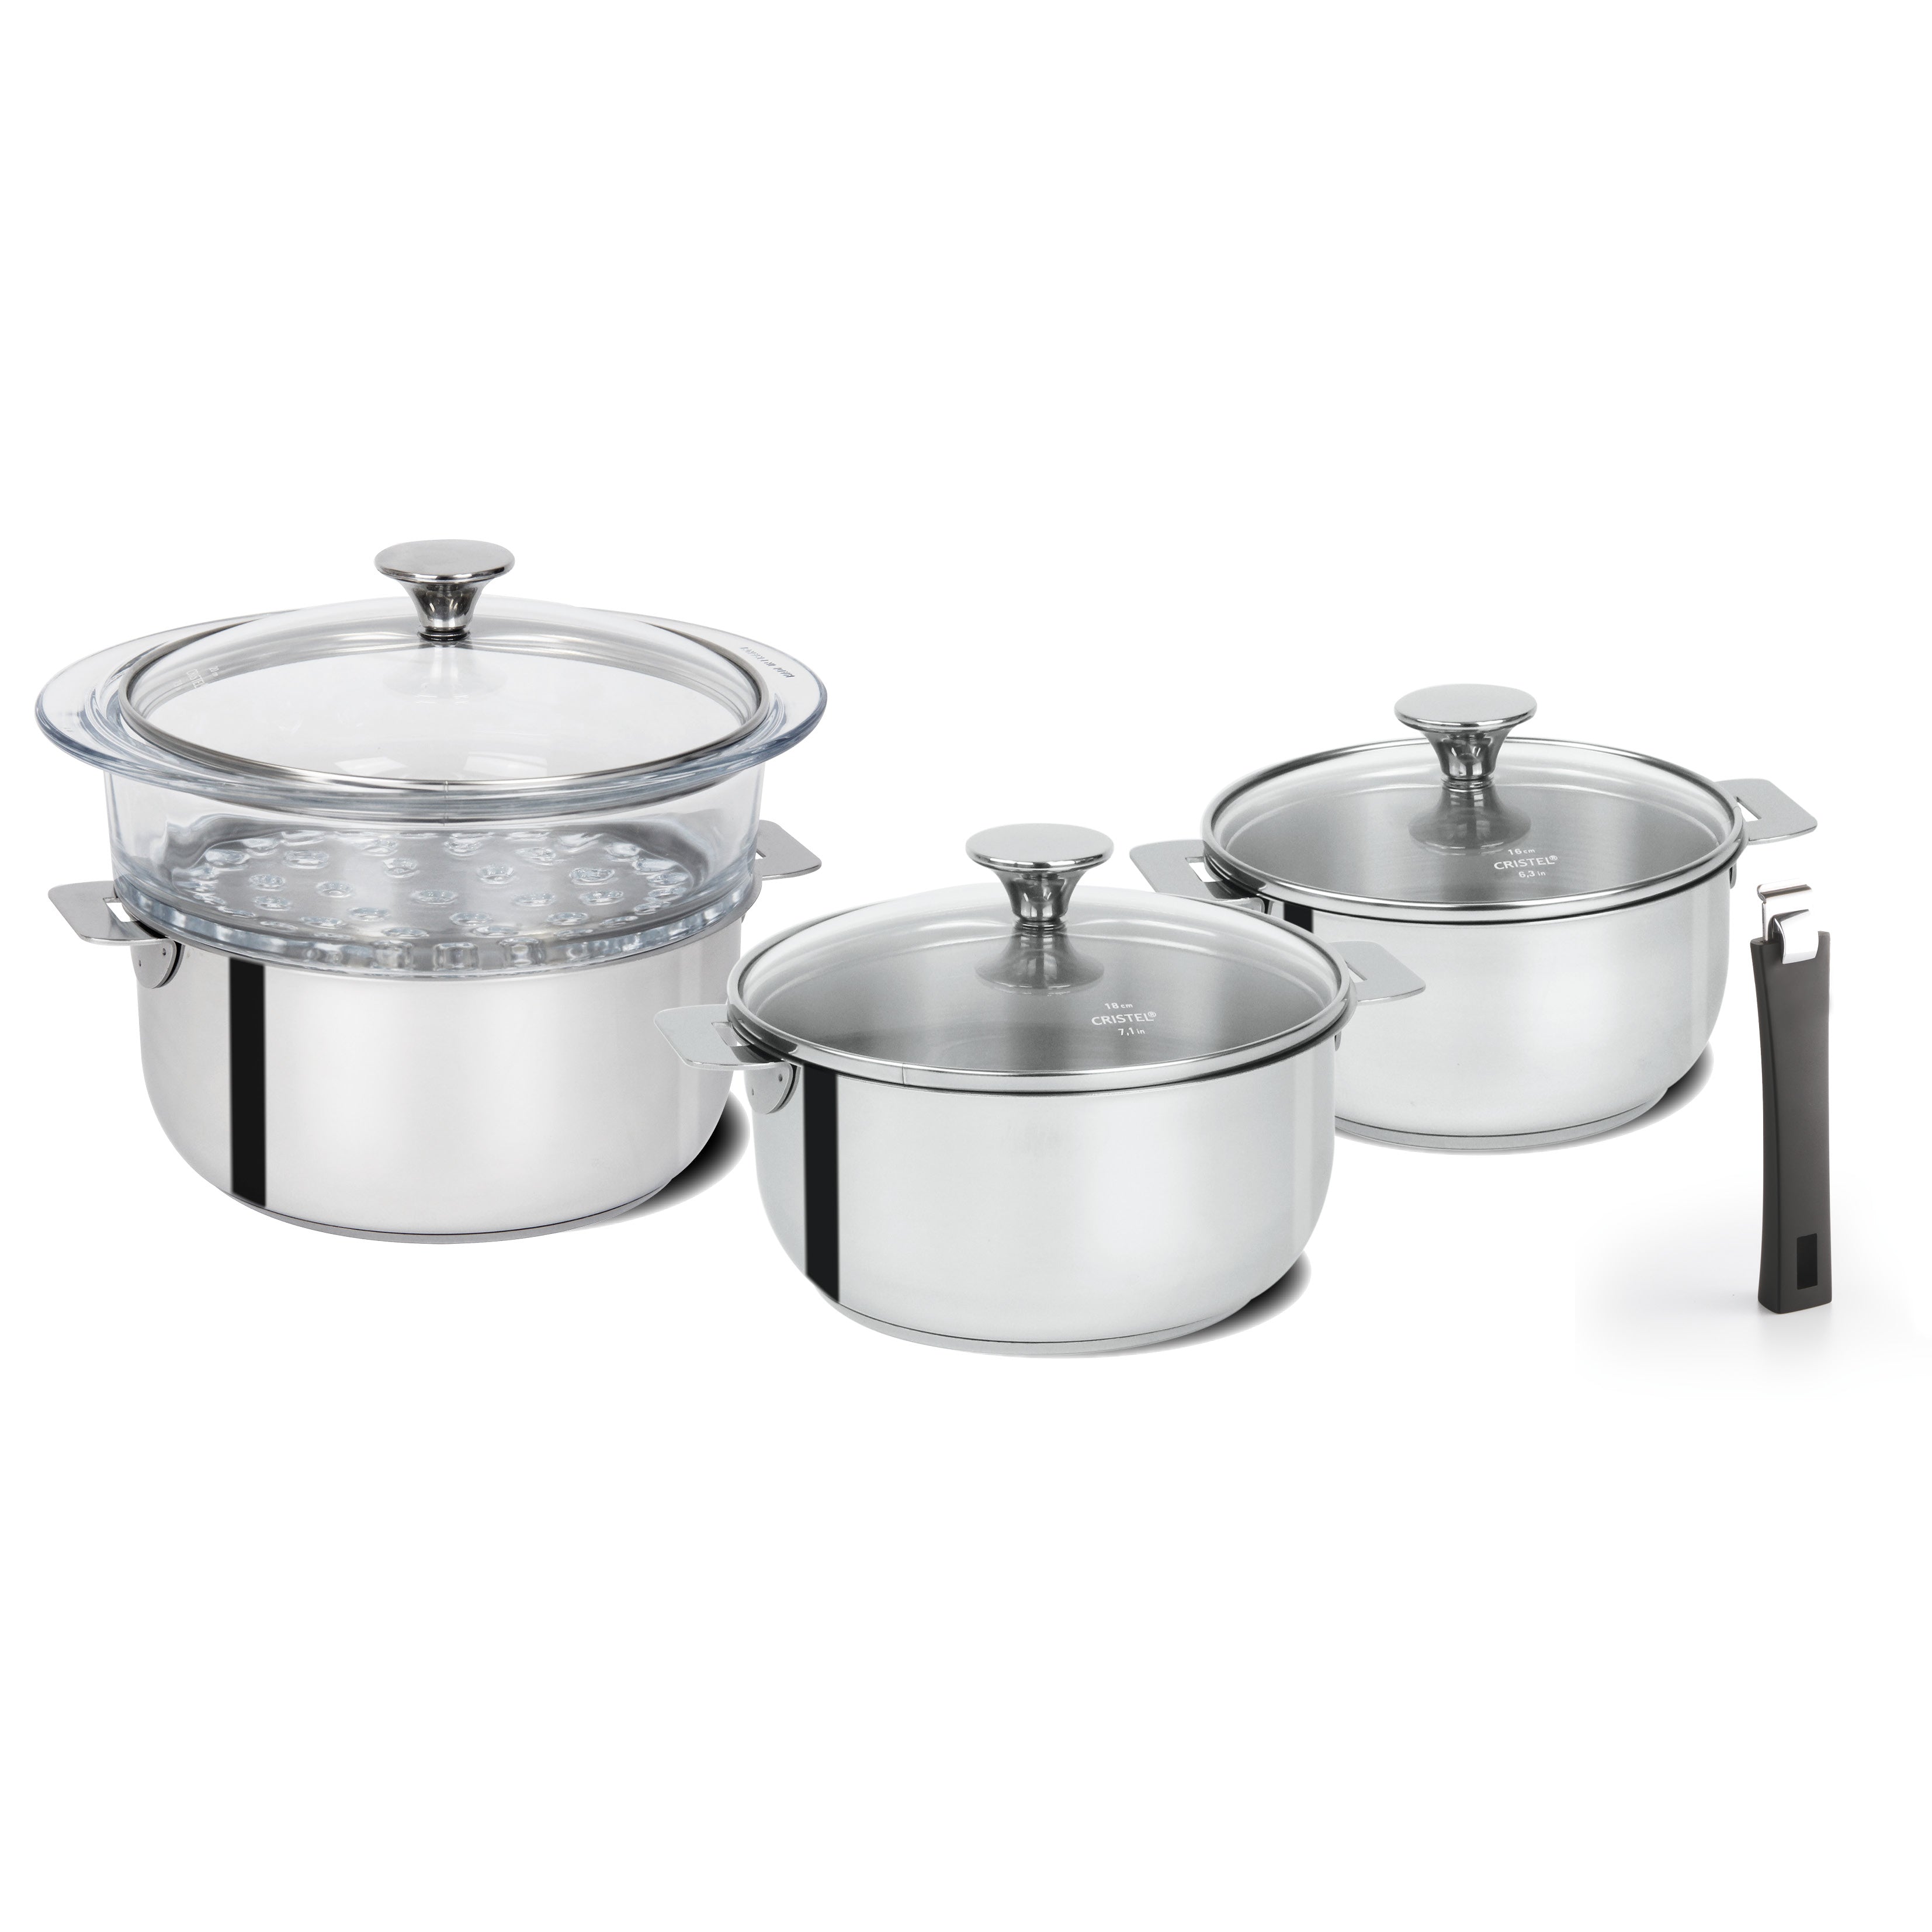 Cristel Strate 18/10 Stainless Steel 13 Piece Cookware Set With